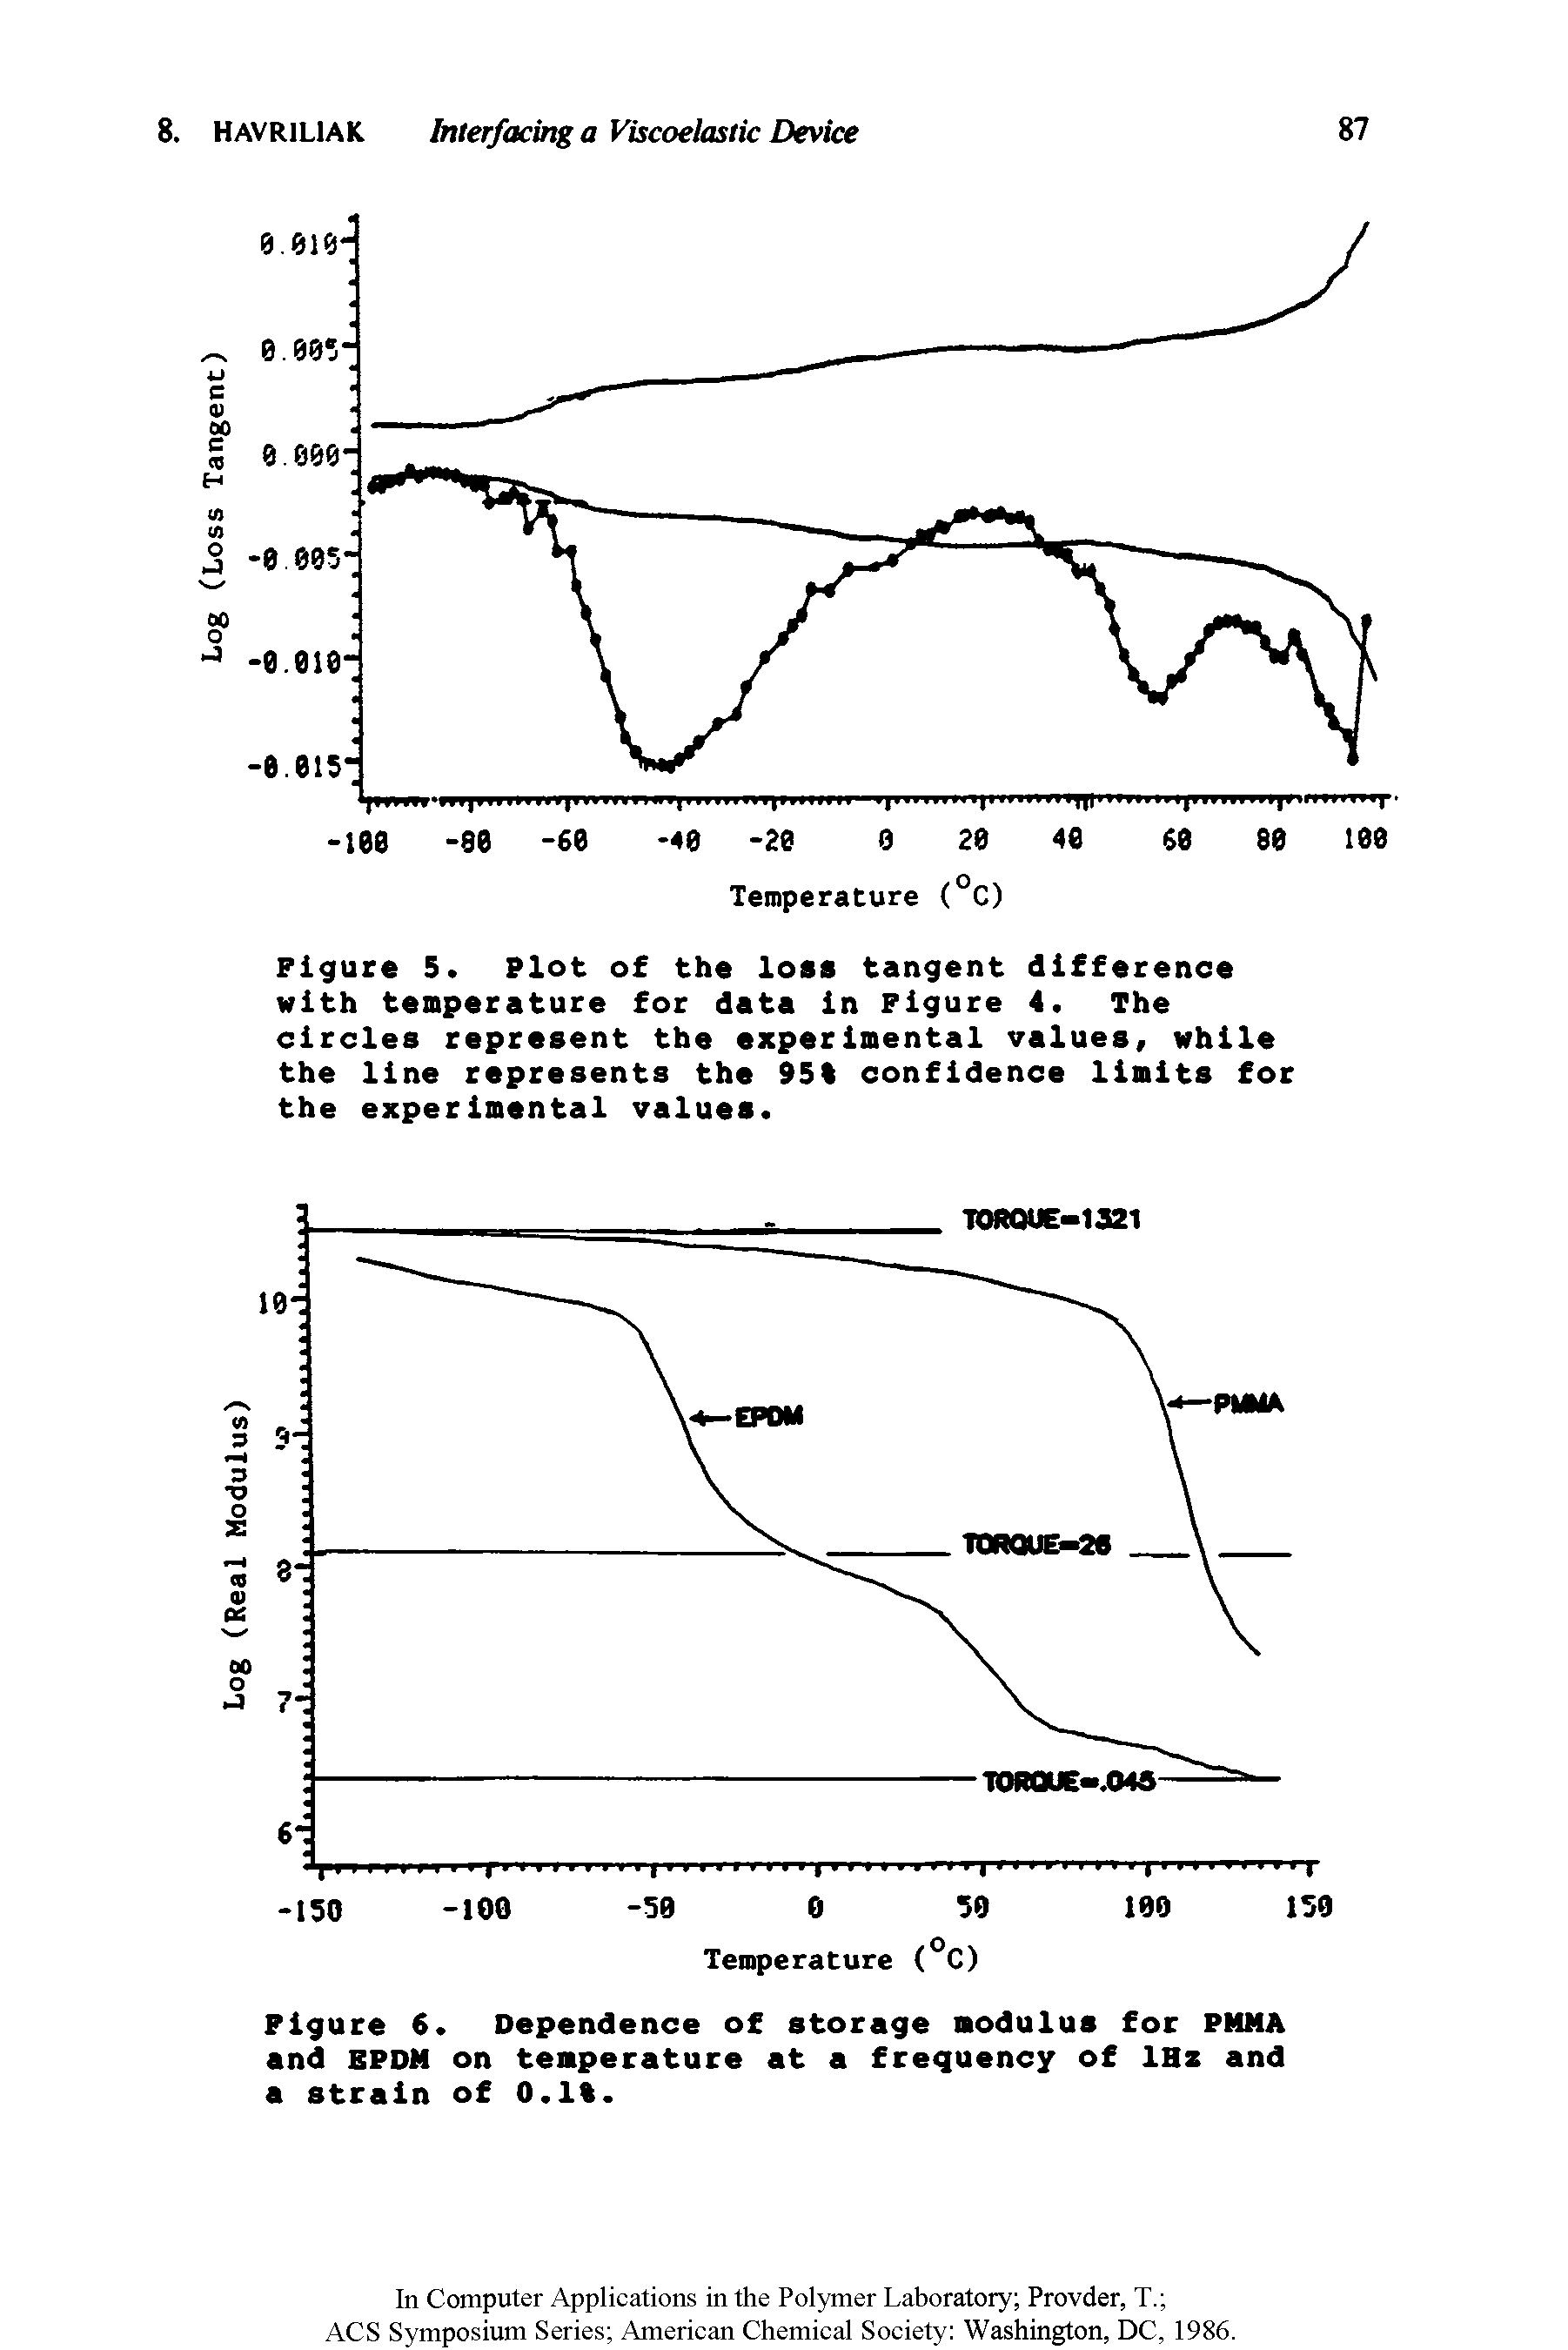 Figure 6. Dependence of storage modulus for PMMA and EPDM on temperature at a frequency of 1Hz and a strain of 0.1%.